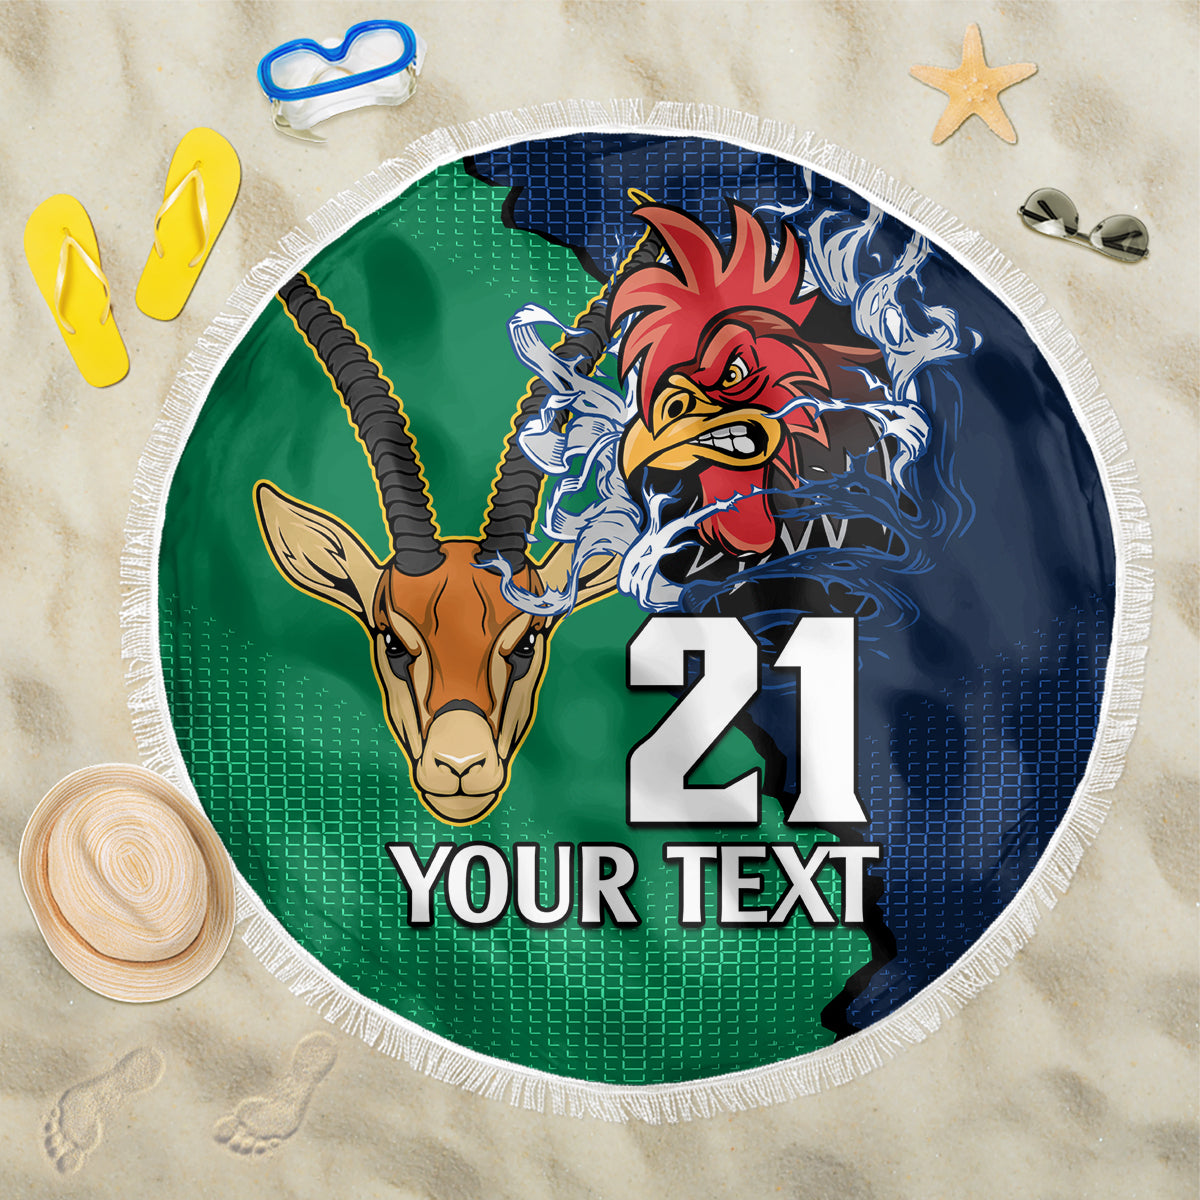 custom-france-south-africa-rugby-beach-blanket-springboks-and-gallic-rooster-world-cup-2023